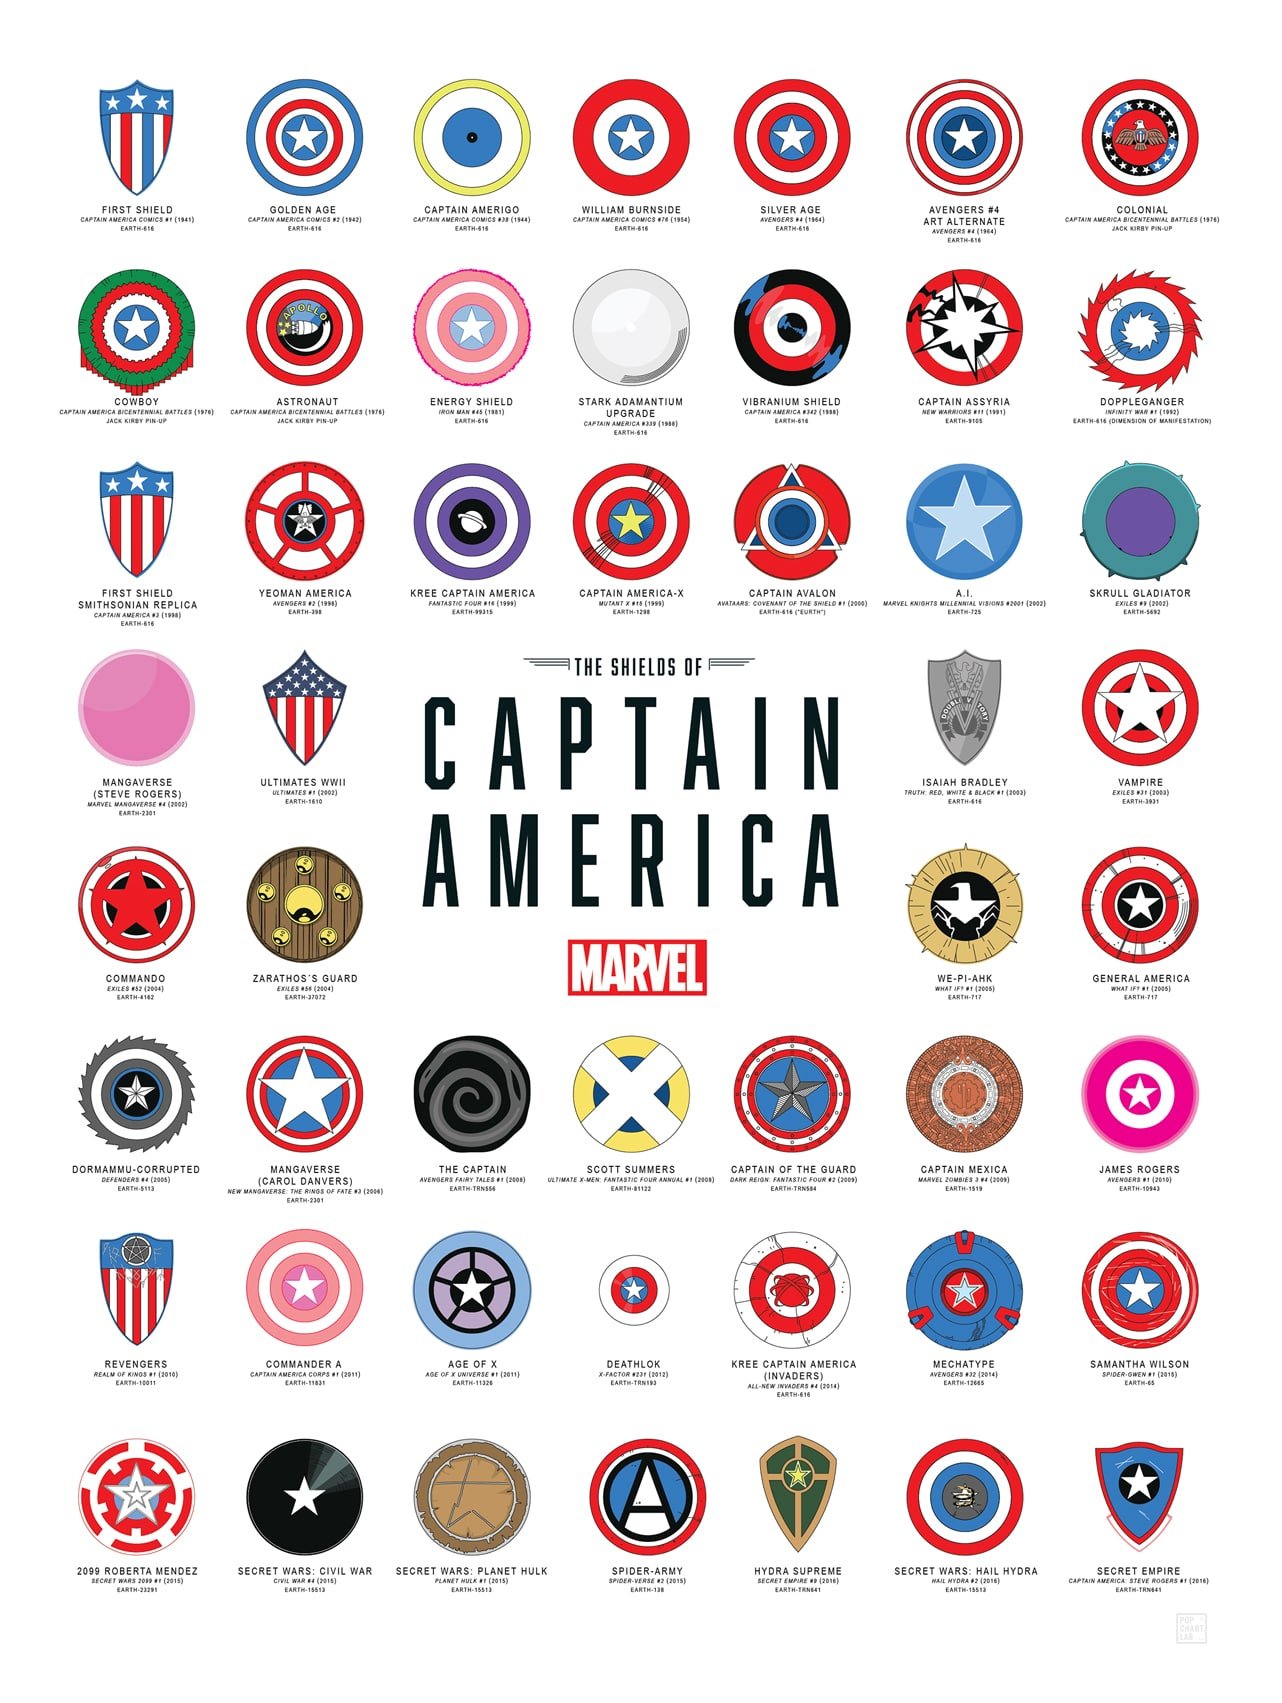 The Shields of Captain America - A Visual History Poster Of Captain America's Shields Designed by Pop Chart Lab